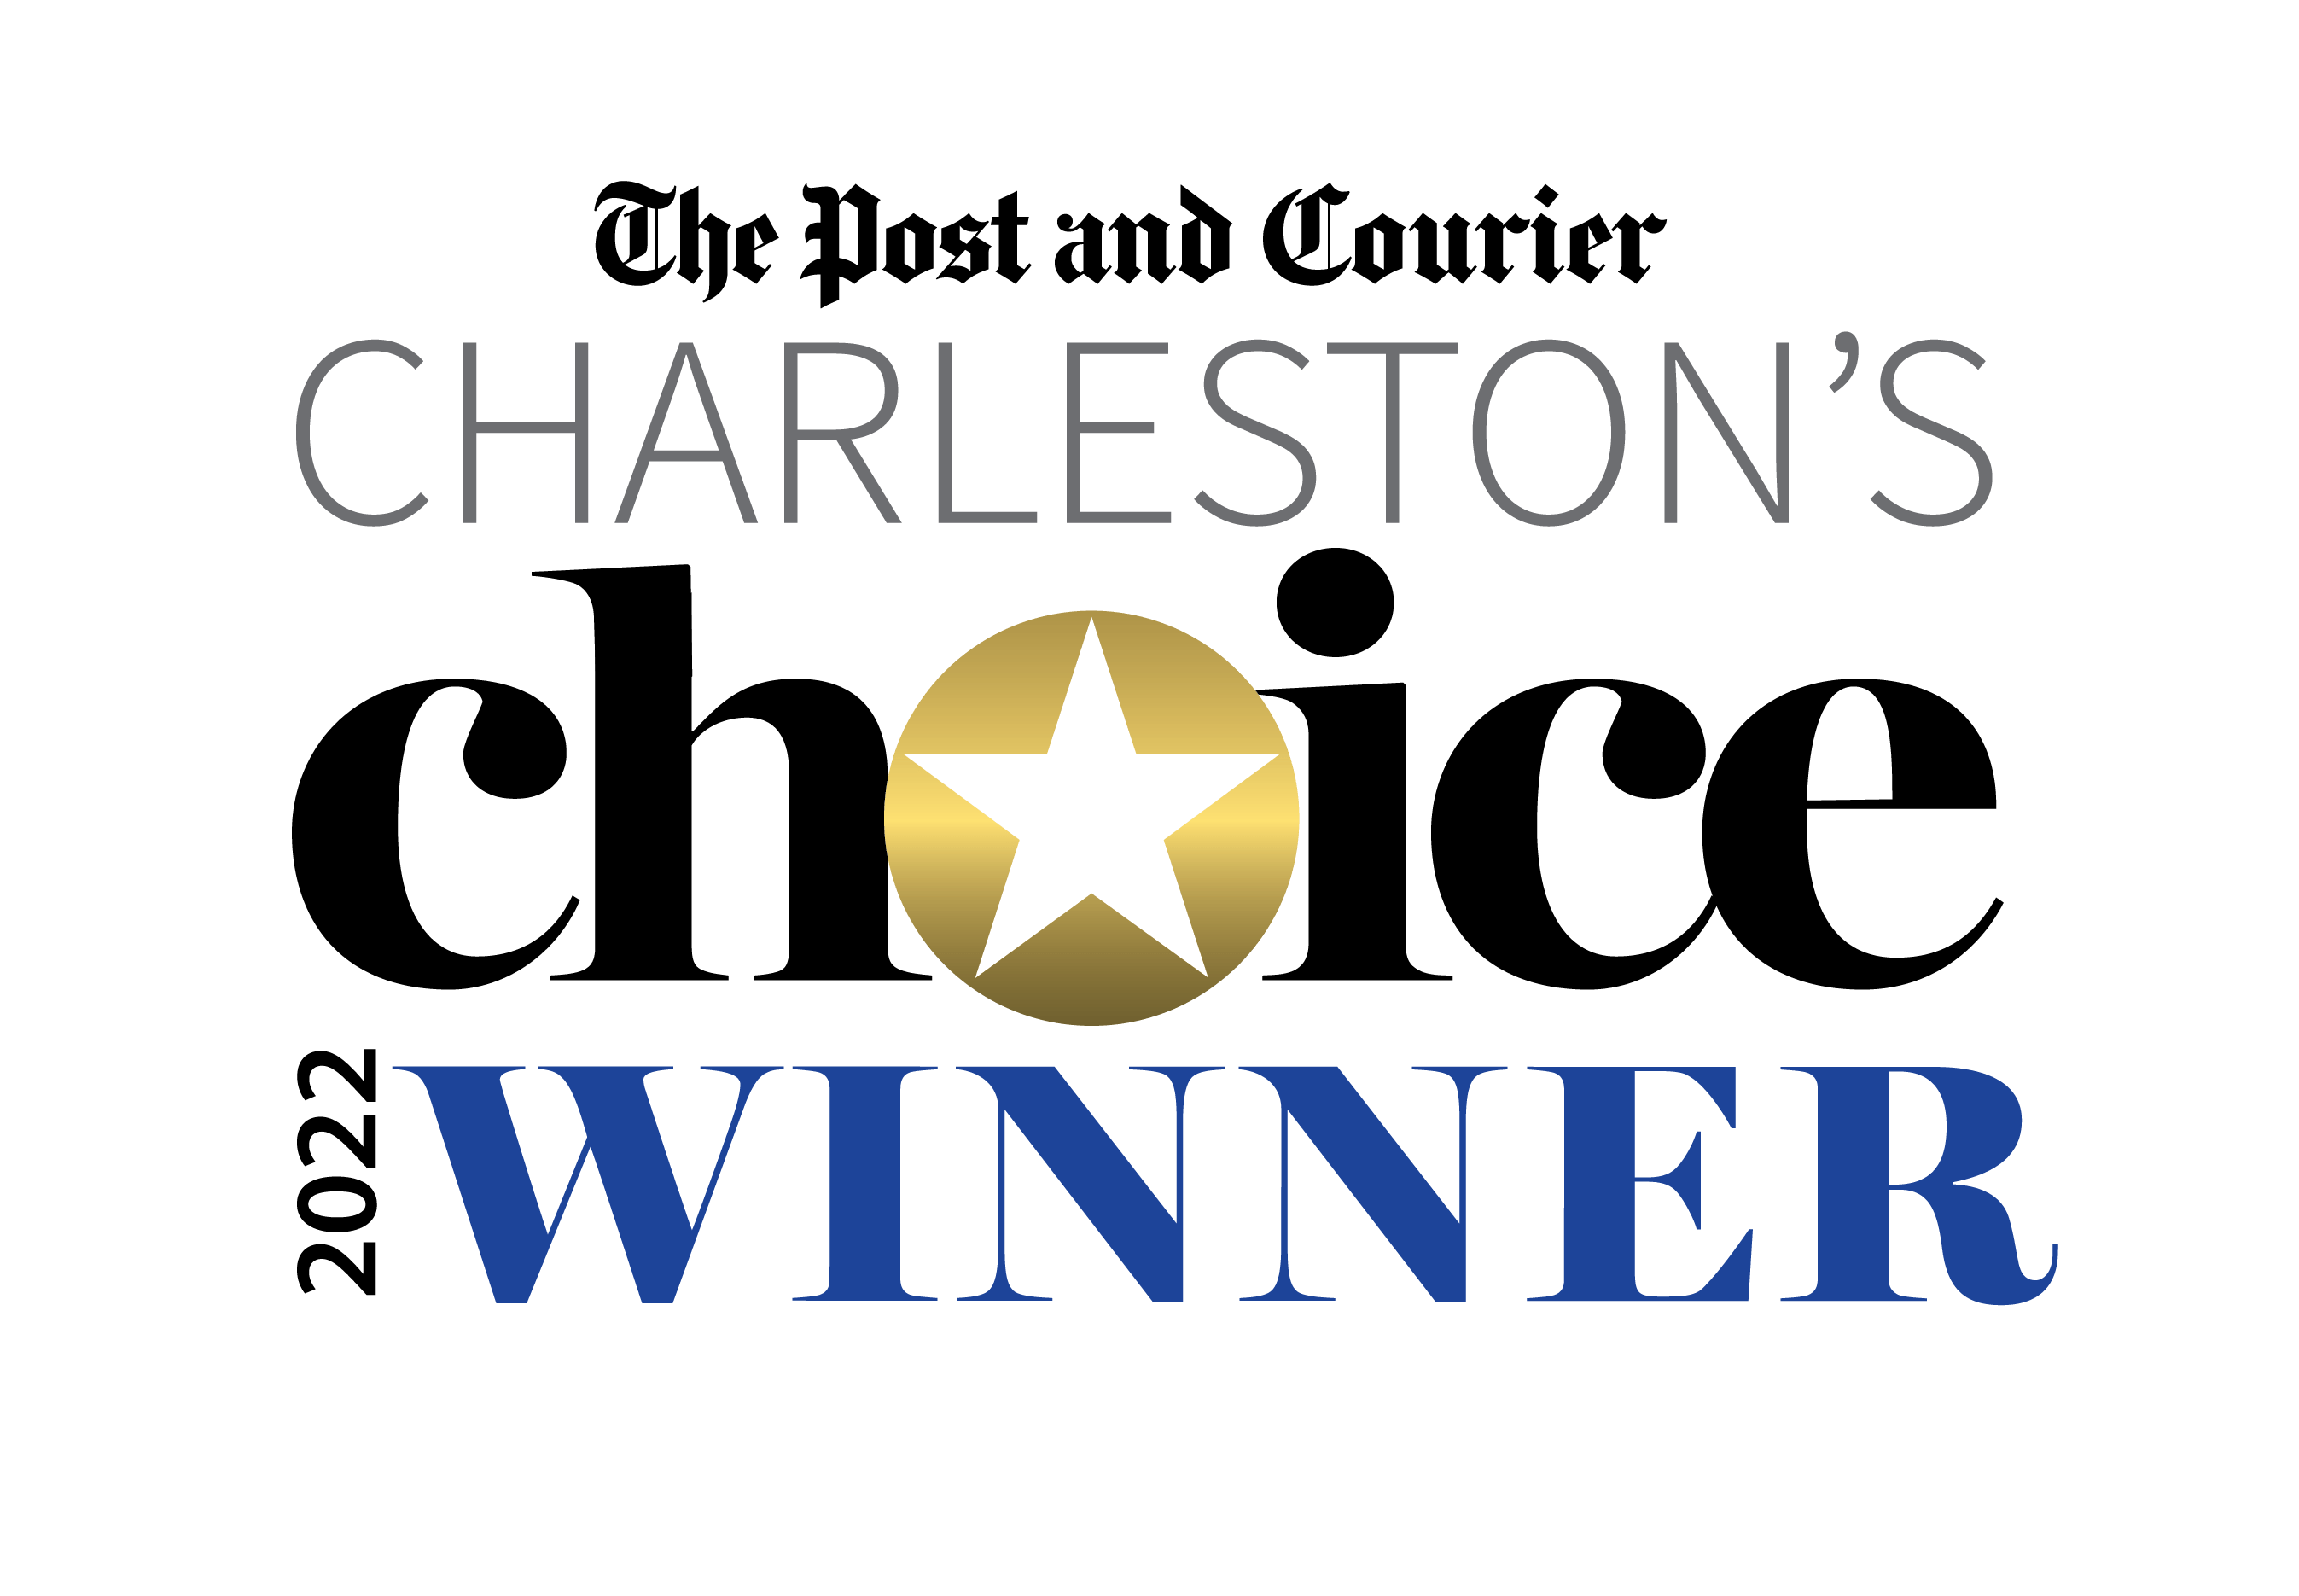 https://www.postandcourier.com/special/charlestonschoice/page-l77/page_3397b37a-6bad-59f9-a657-02d6777ea1e8.html